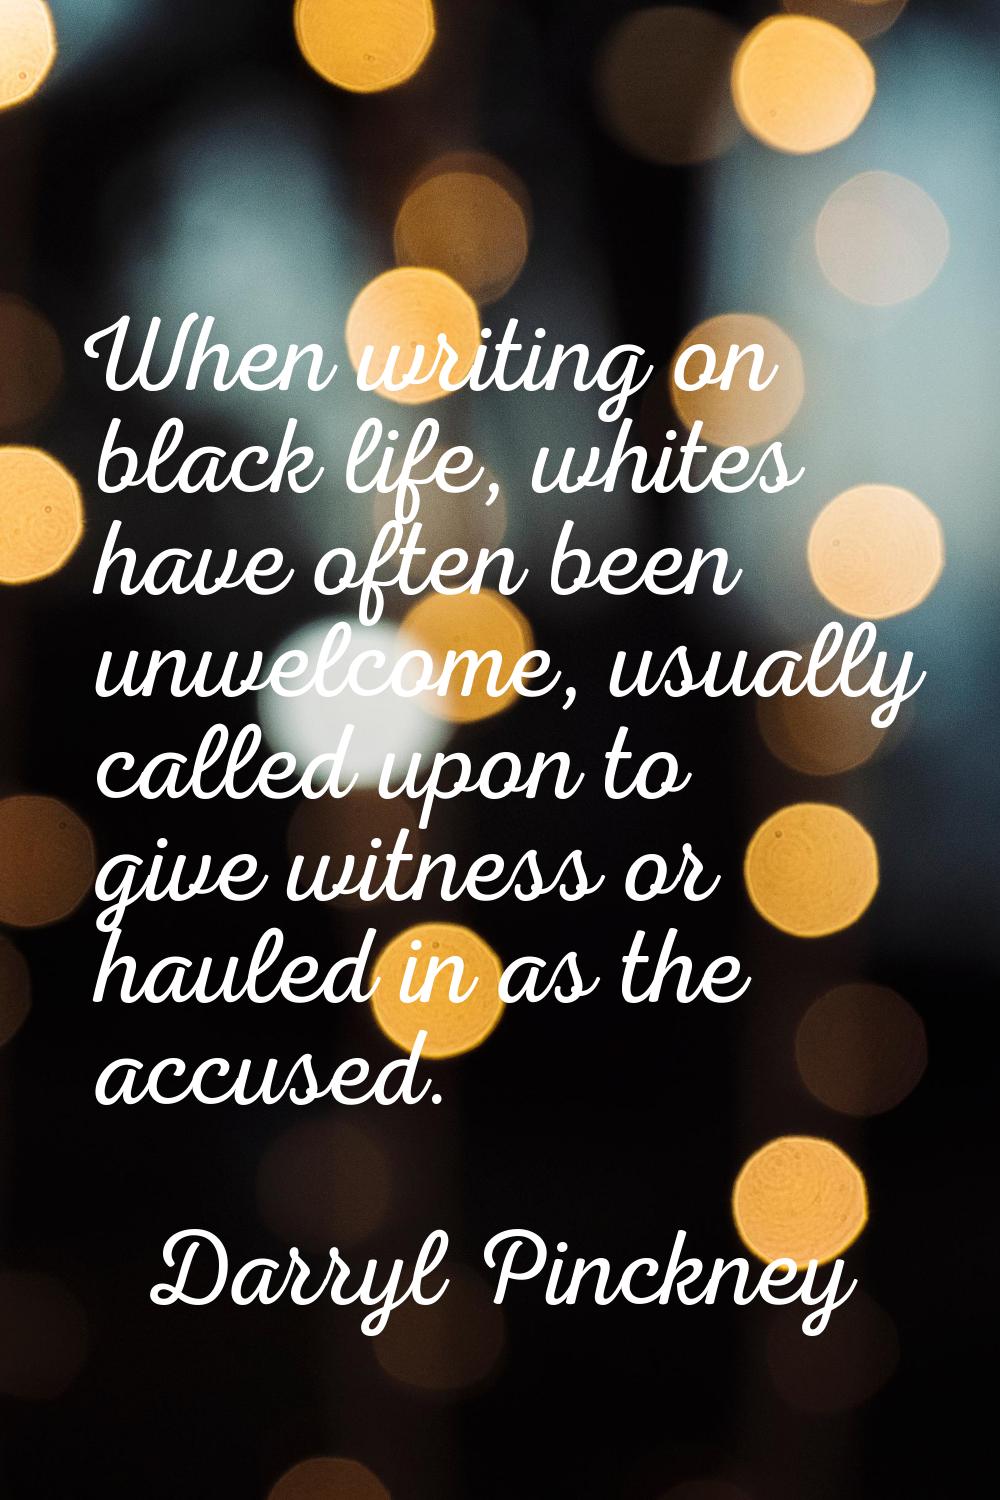 When writing on black life, whites have often been unwelcome, usually called upon to give witness o